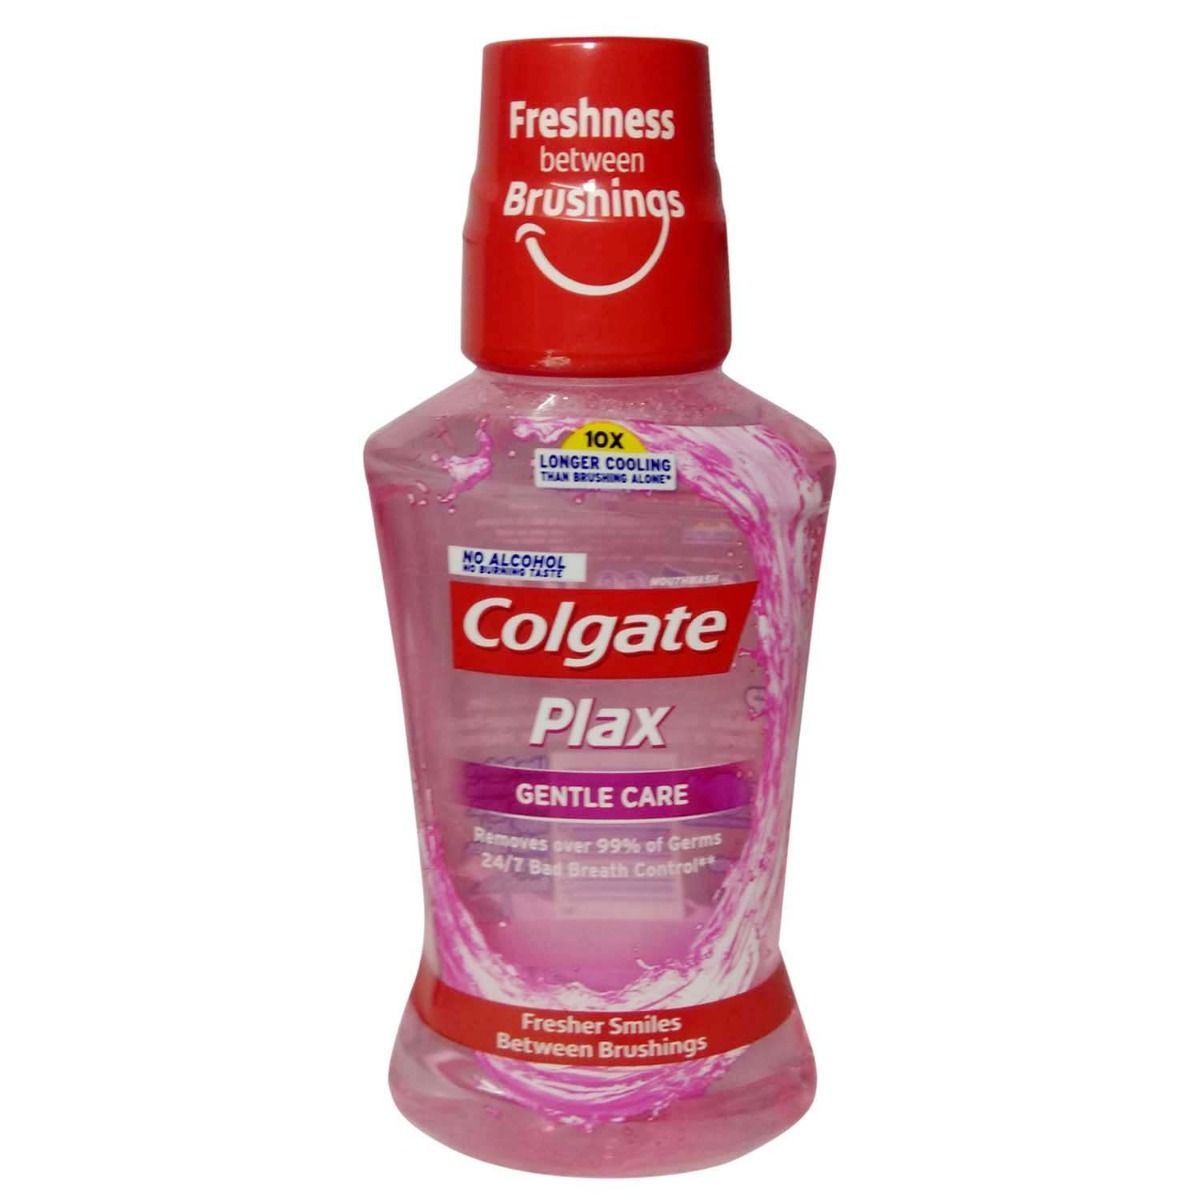 Colgate Plax Gentle Care Mouthwash, 250 ml, Pack of 1 